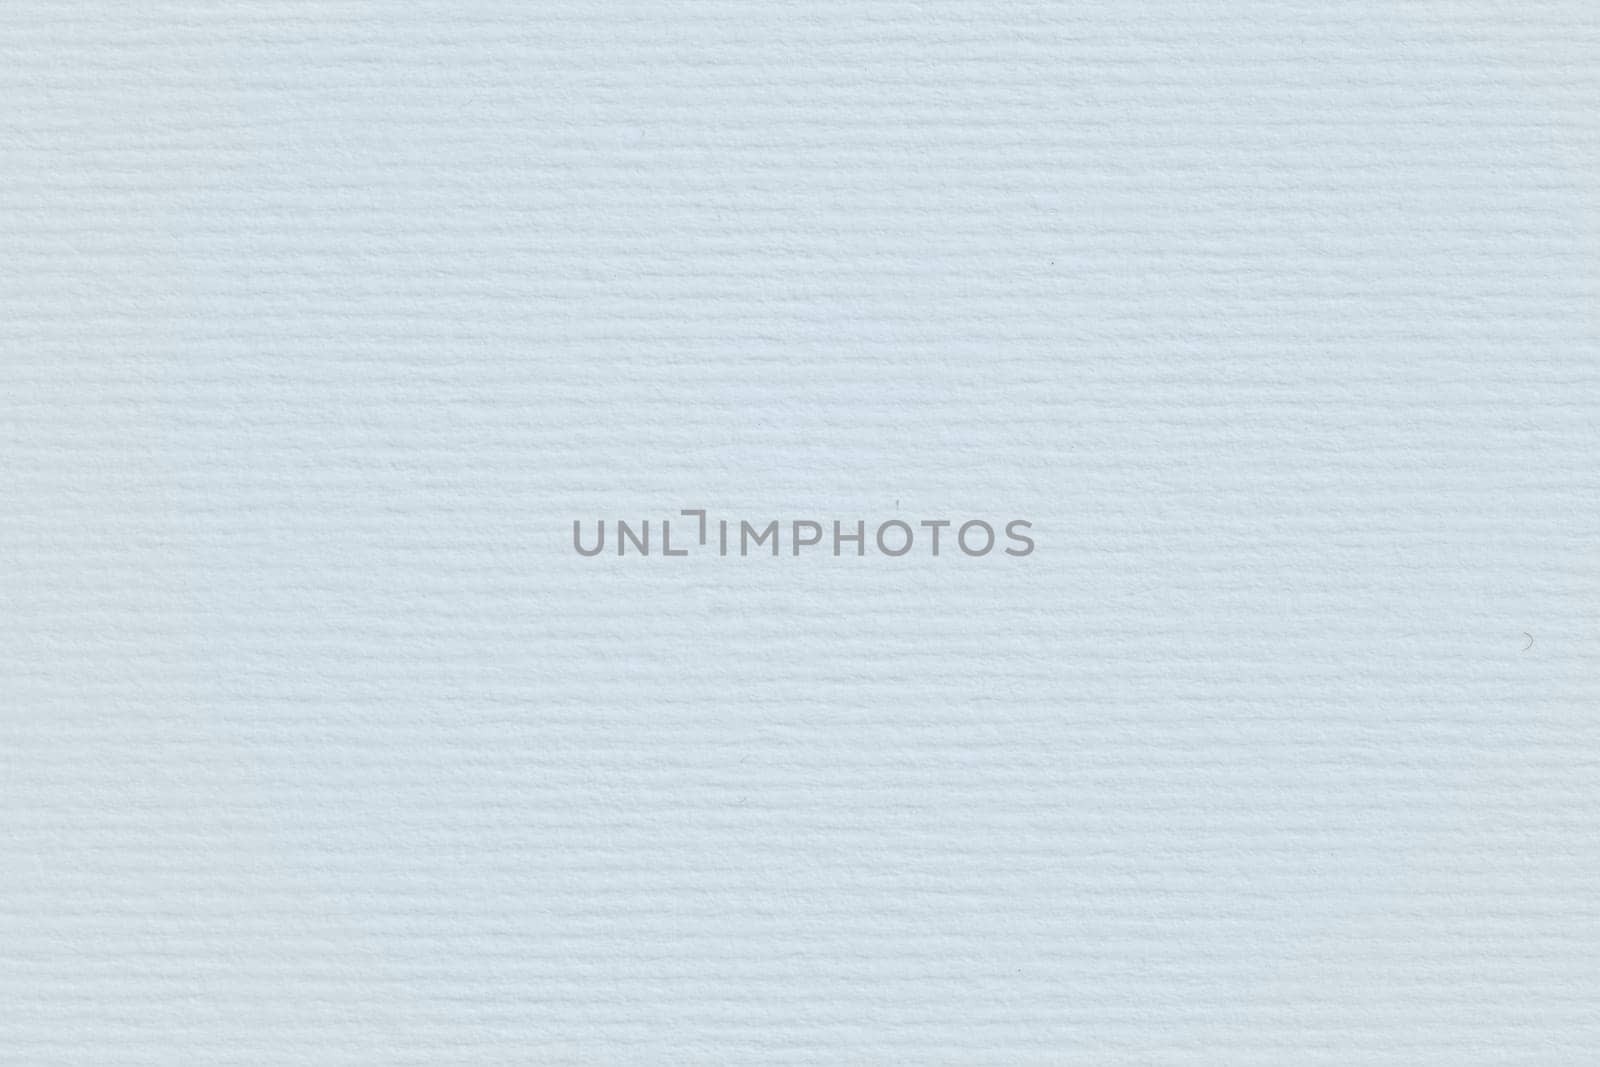 White / light blue structured paper with horizontal lines texture
